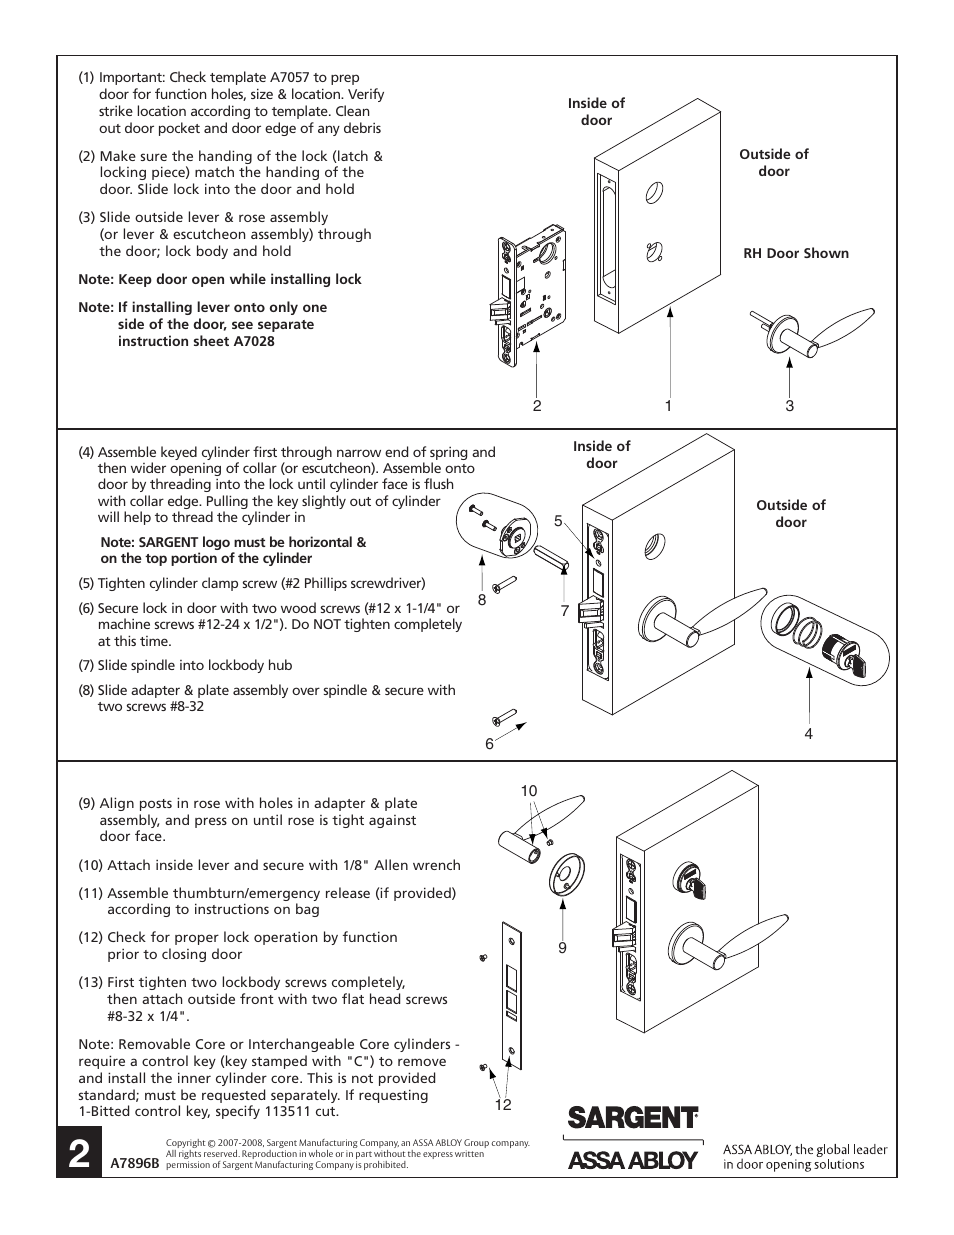 SARGENT 7900 Mortise Lock User Manual Page 2 / 4 Also for 8200